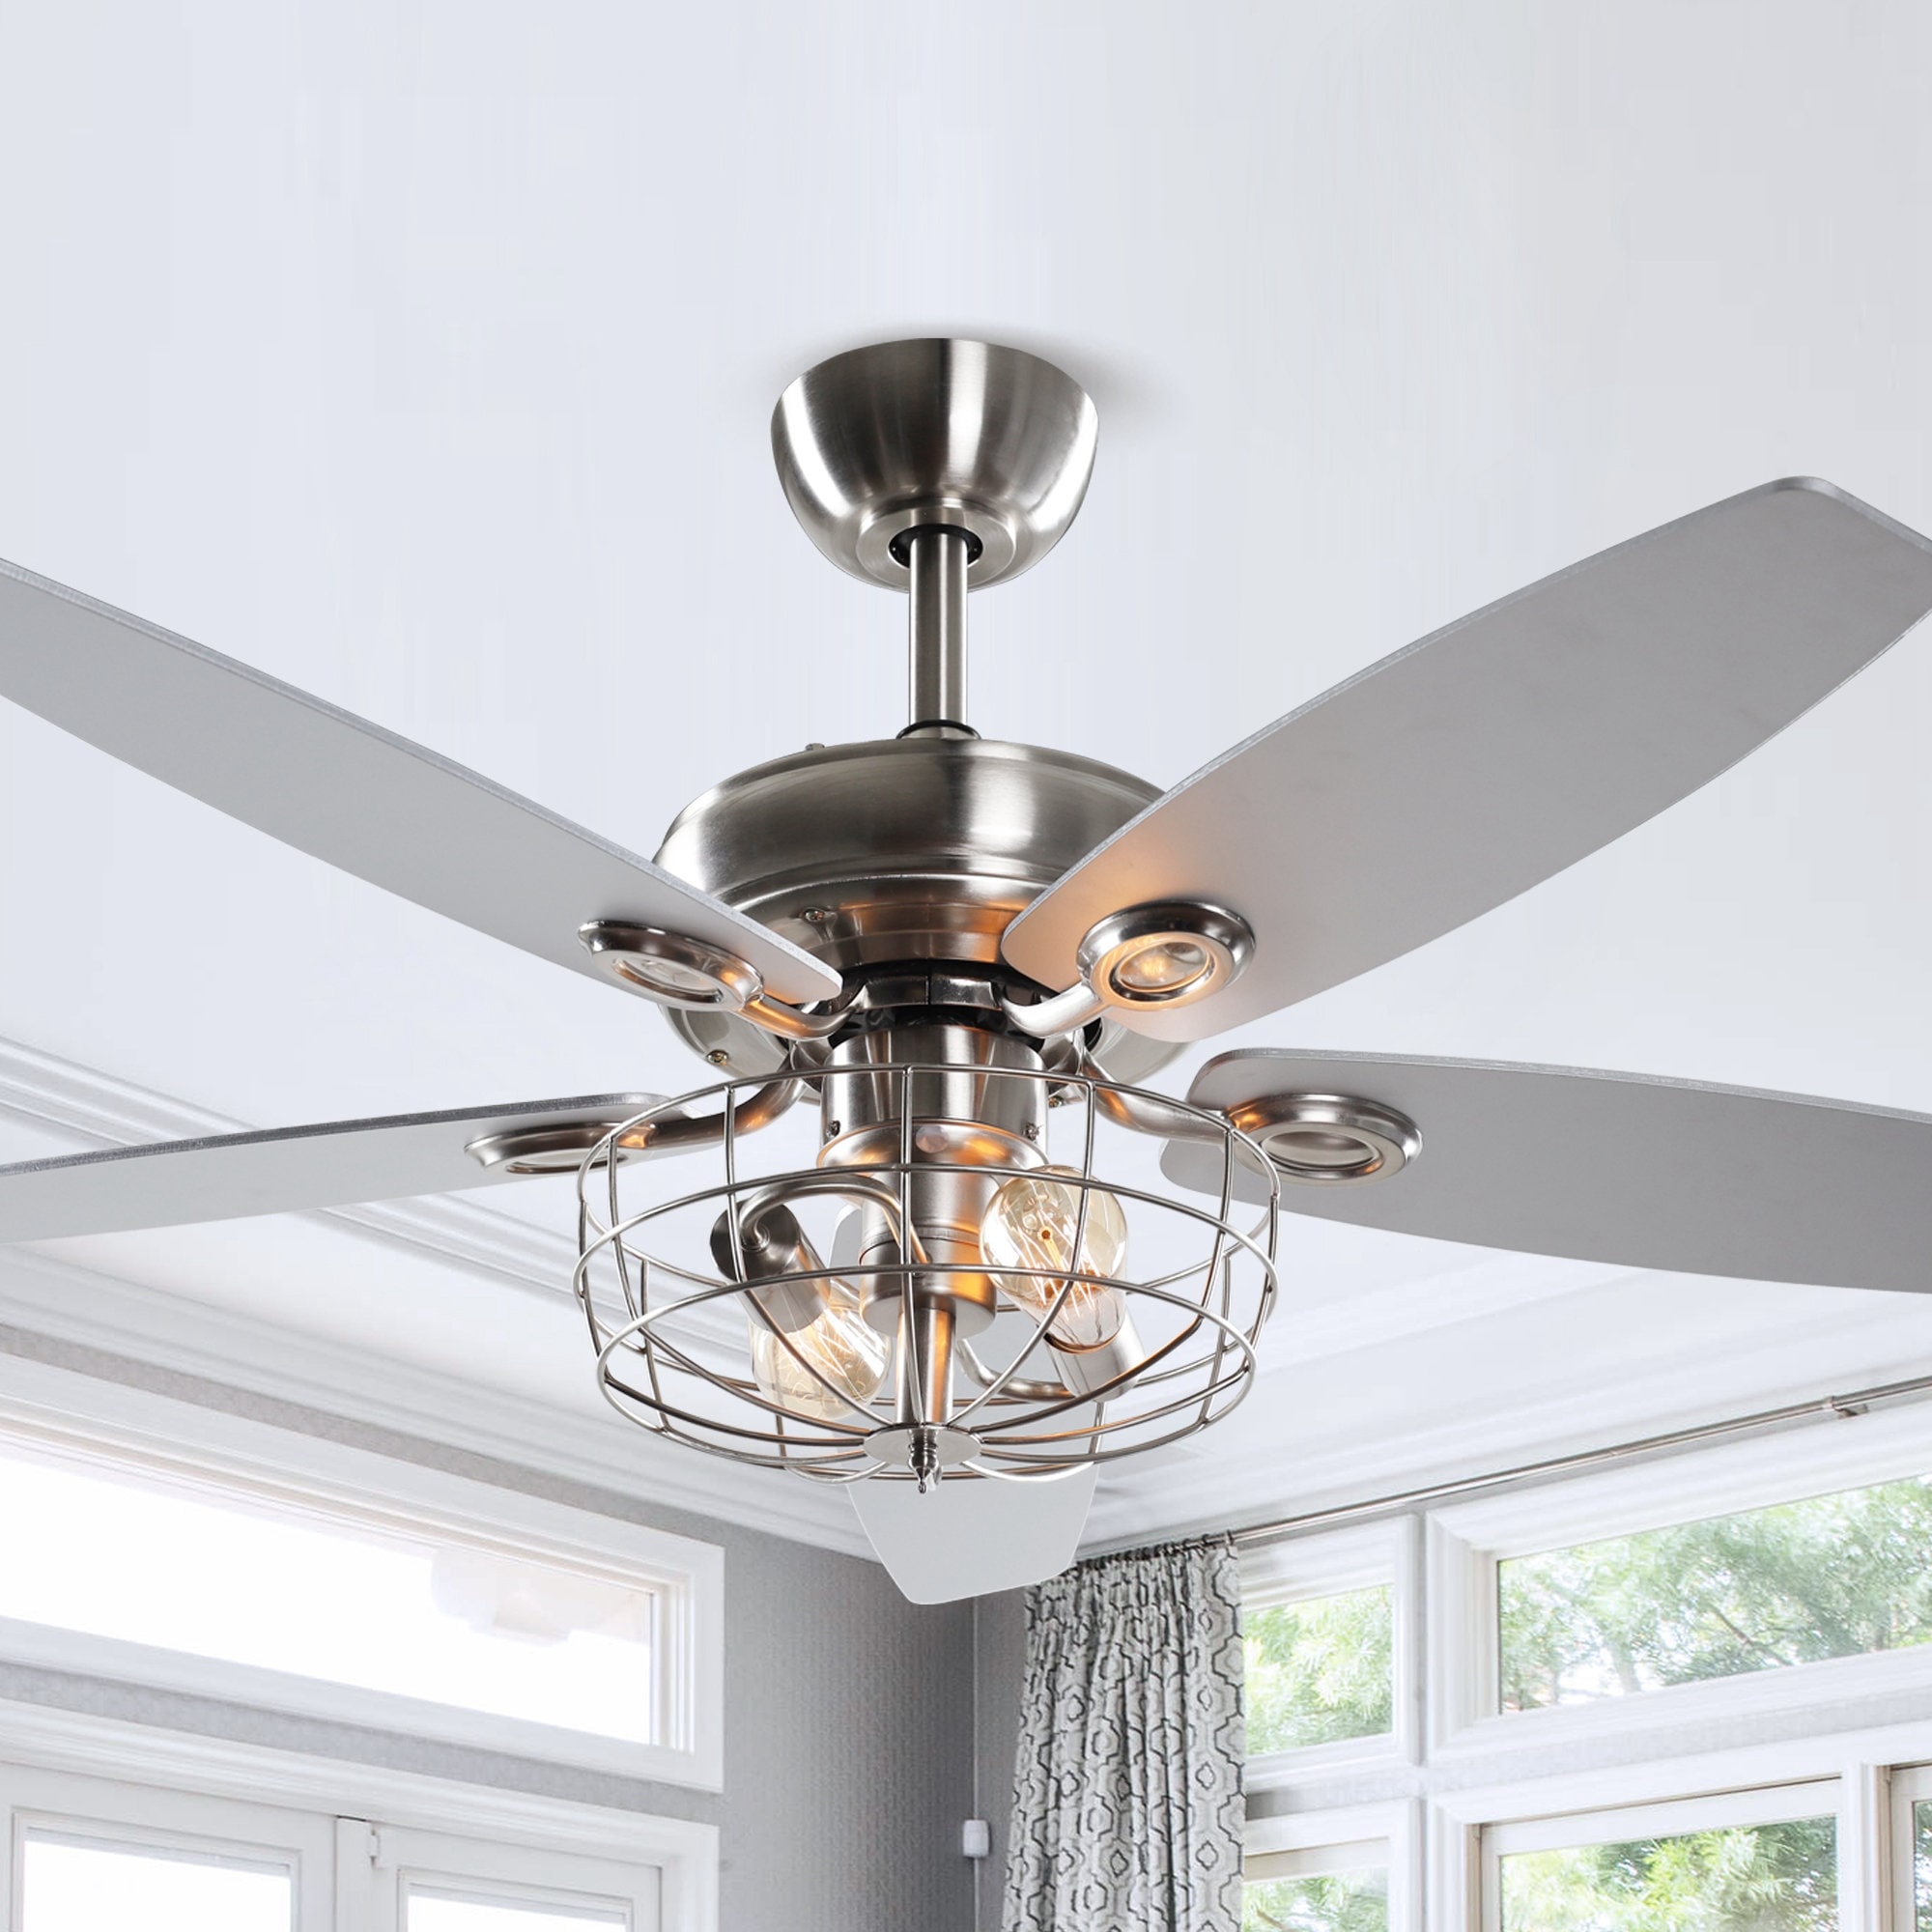 Industrial 5-Blade Brushed Nickel Caged Ceiling Fan with Remote 52 Inches  On Sale Bed Bath  Beyond 32700087